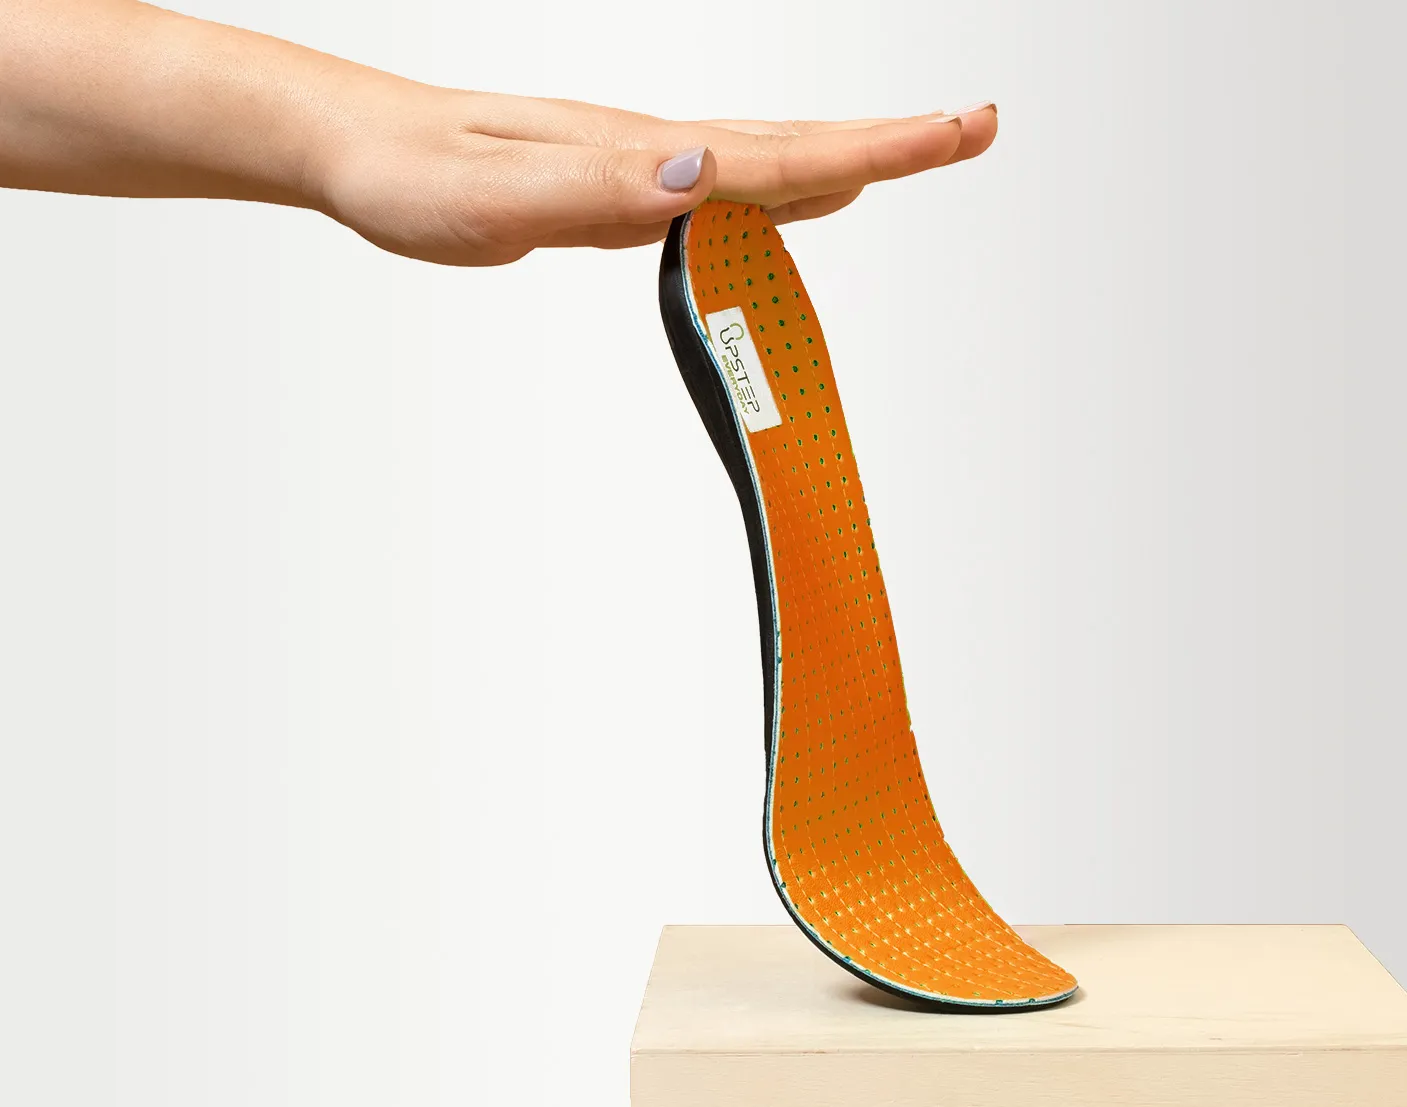 Upstep custom insole for flat feet being presented from the side